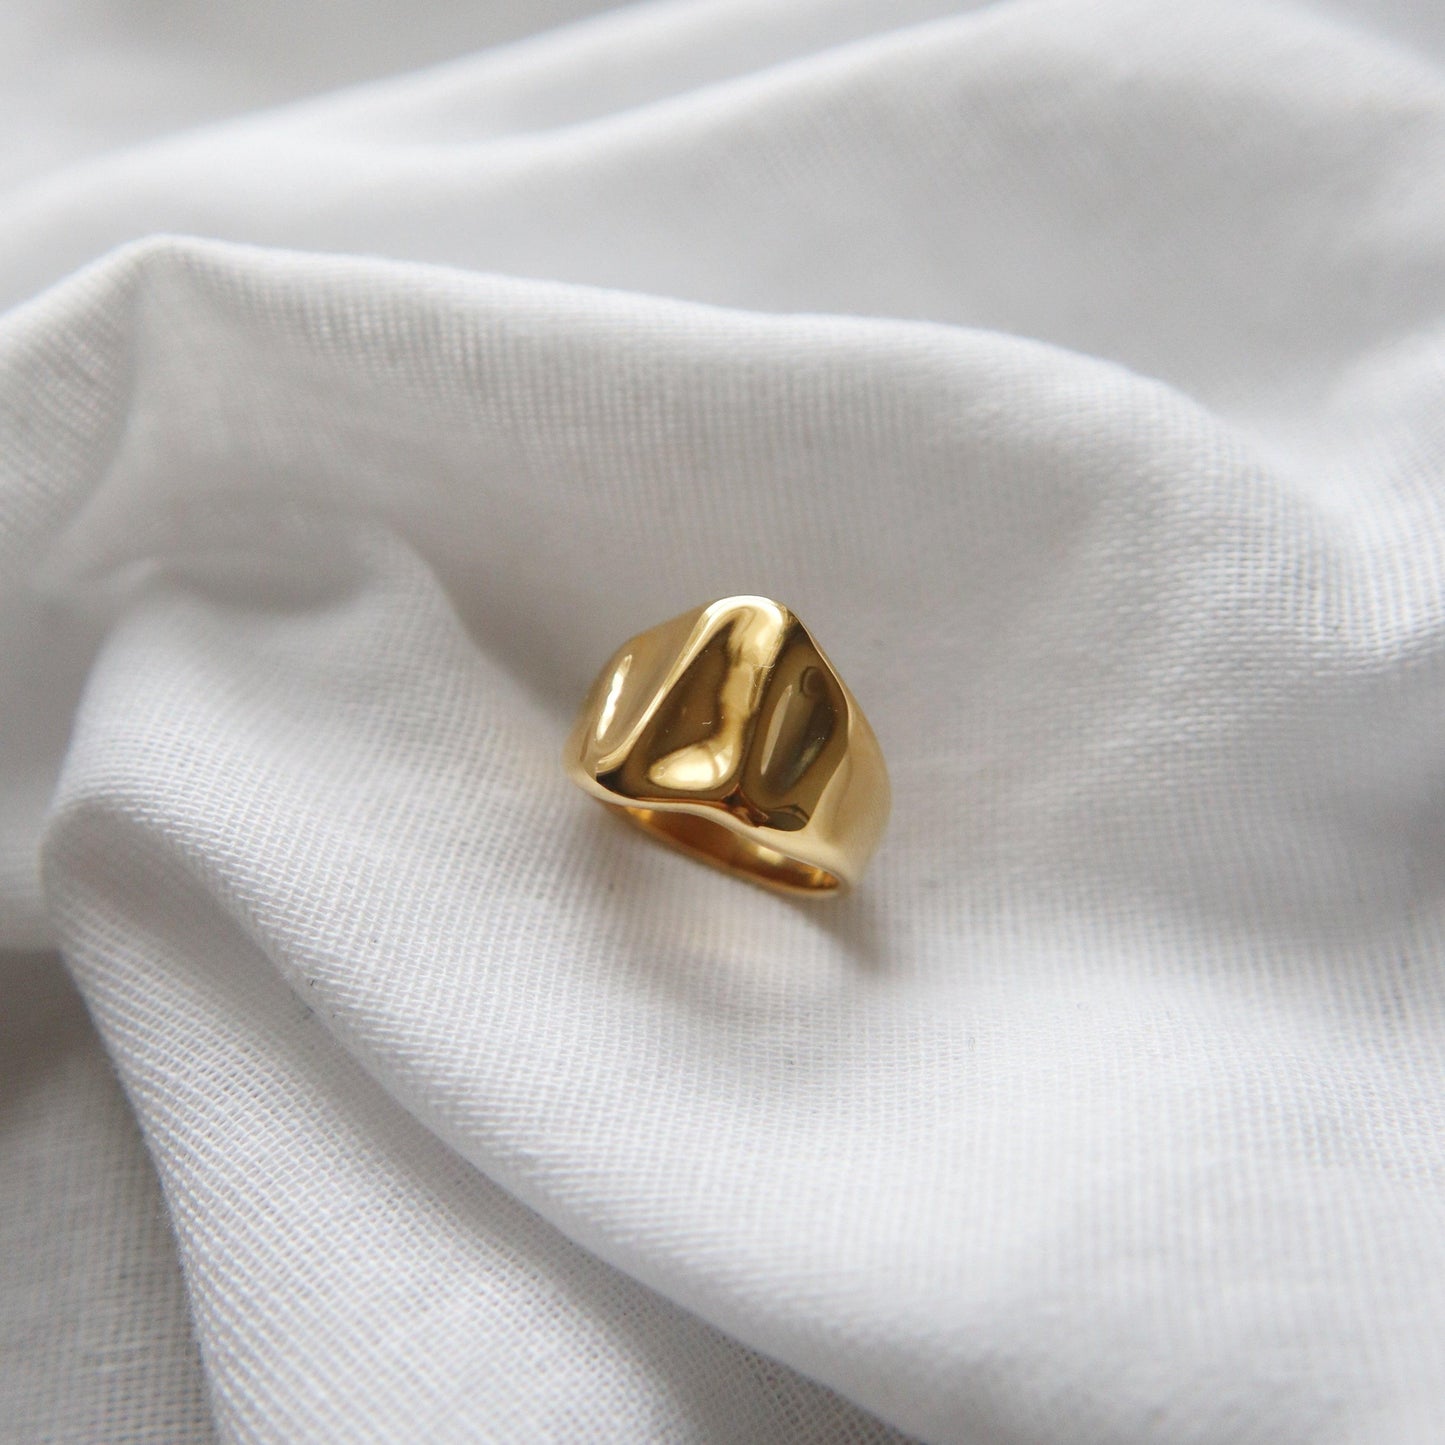 Kendall Ring | Bold Statement Ring - JESSA JEWELRY | GOLD JEWELRY; dainty, affordable gold everyday jewelry. Tarnish free, water-resistant, hypoallergenic. Jewelry for everyday wear